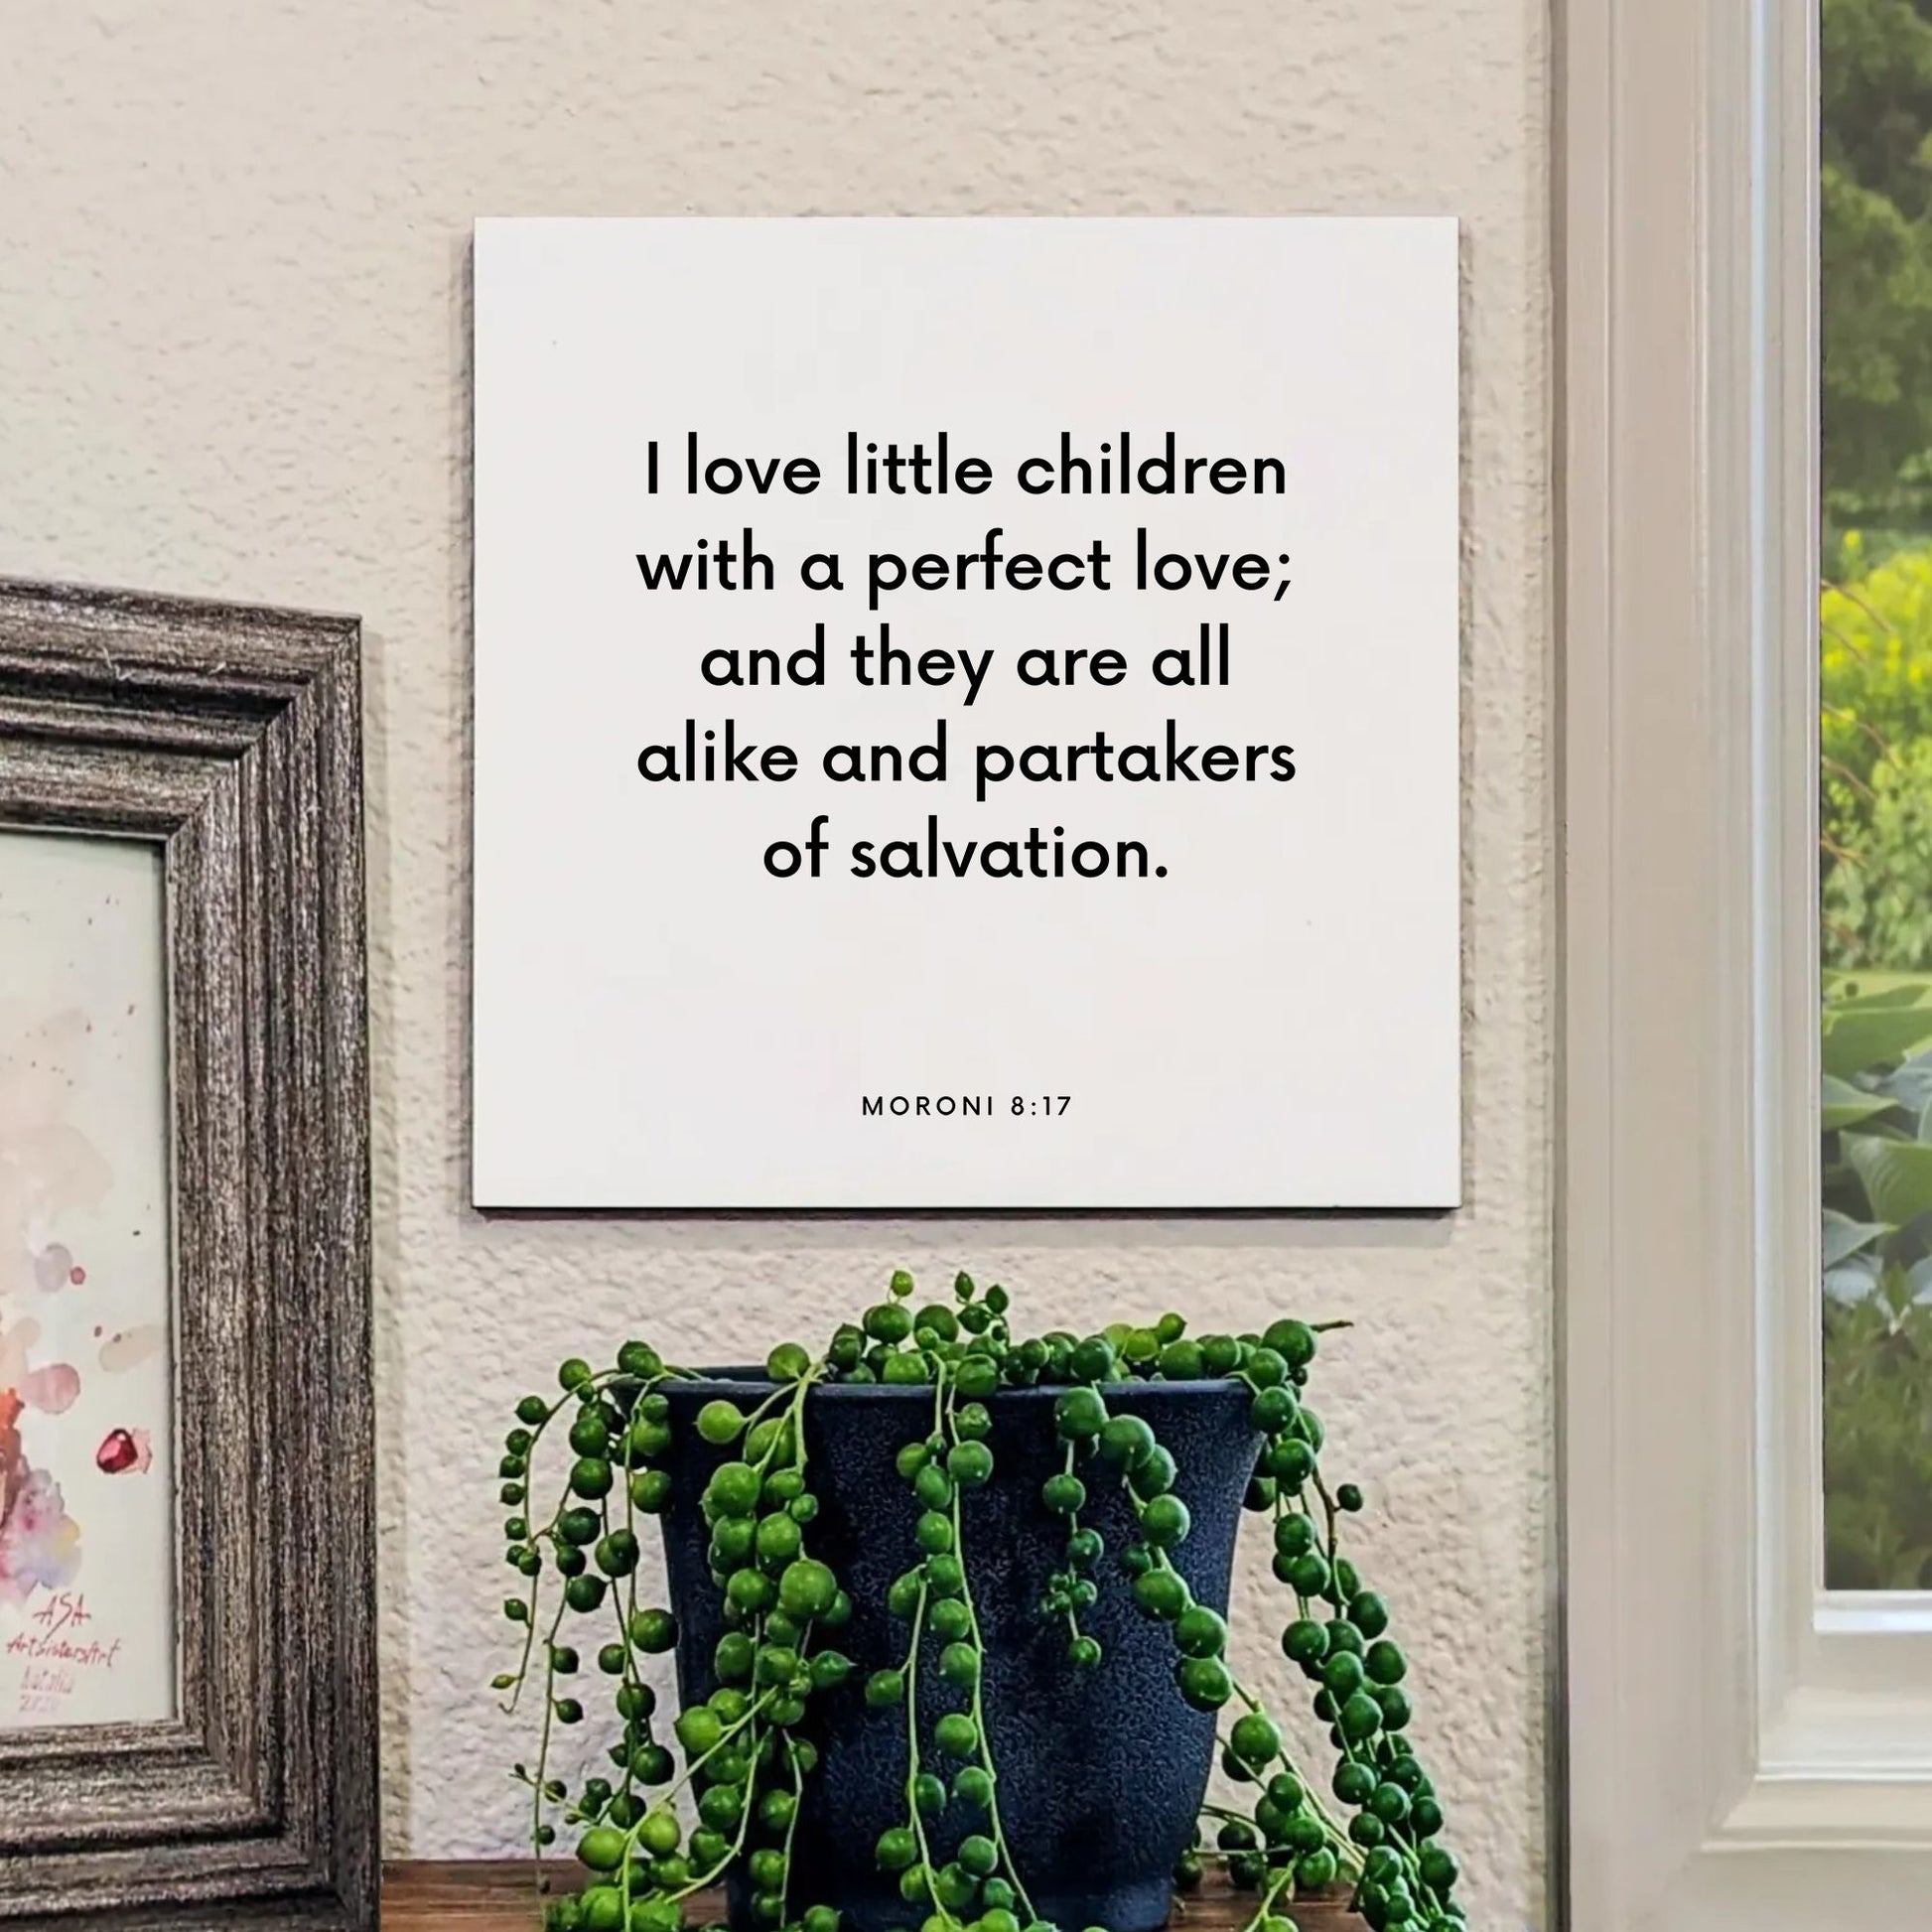 Window mouting of the scripture tile for Moroni 8:17 - "I love little children with a perfect love"